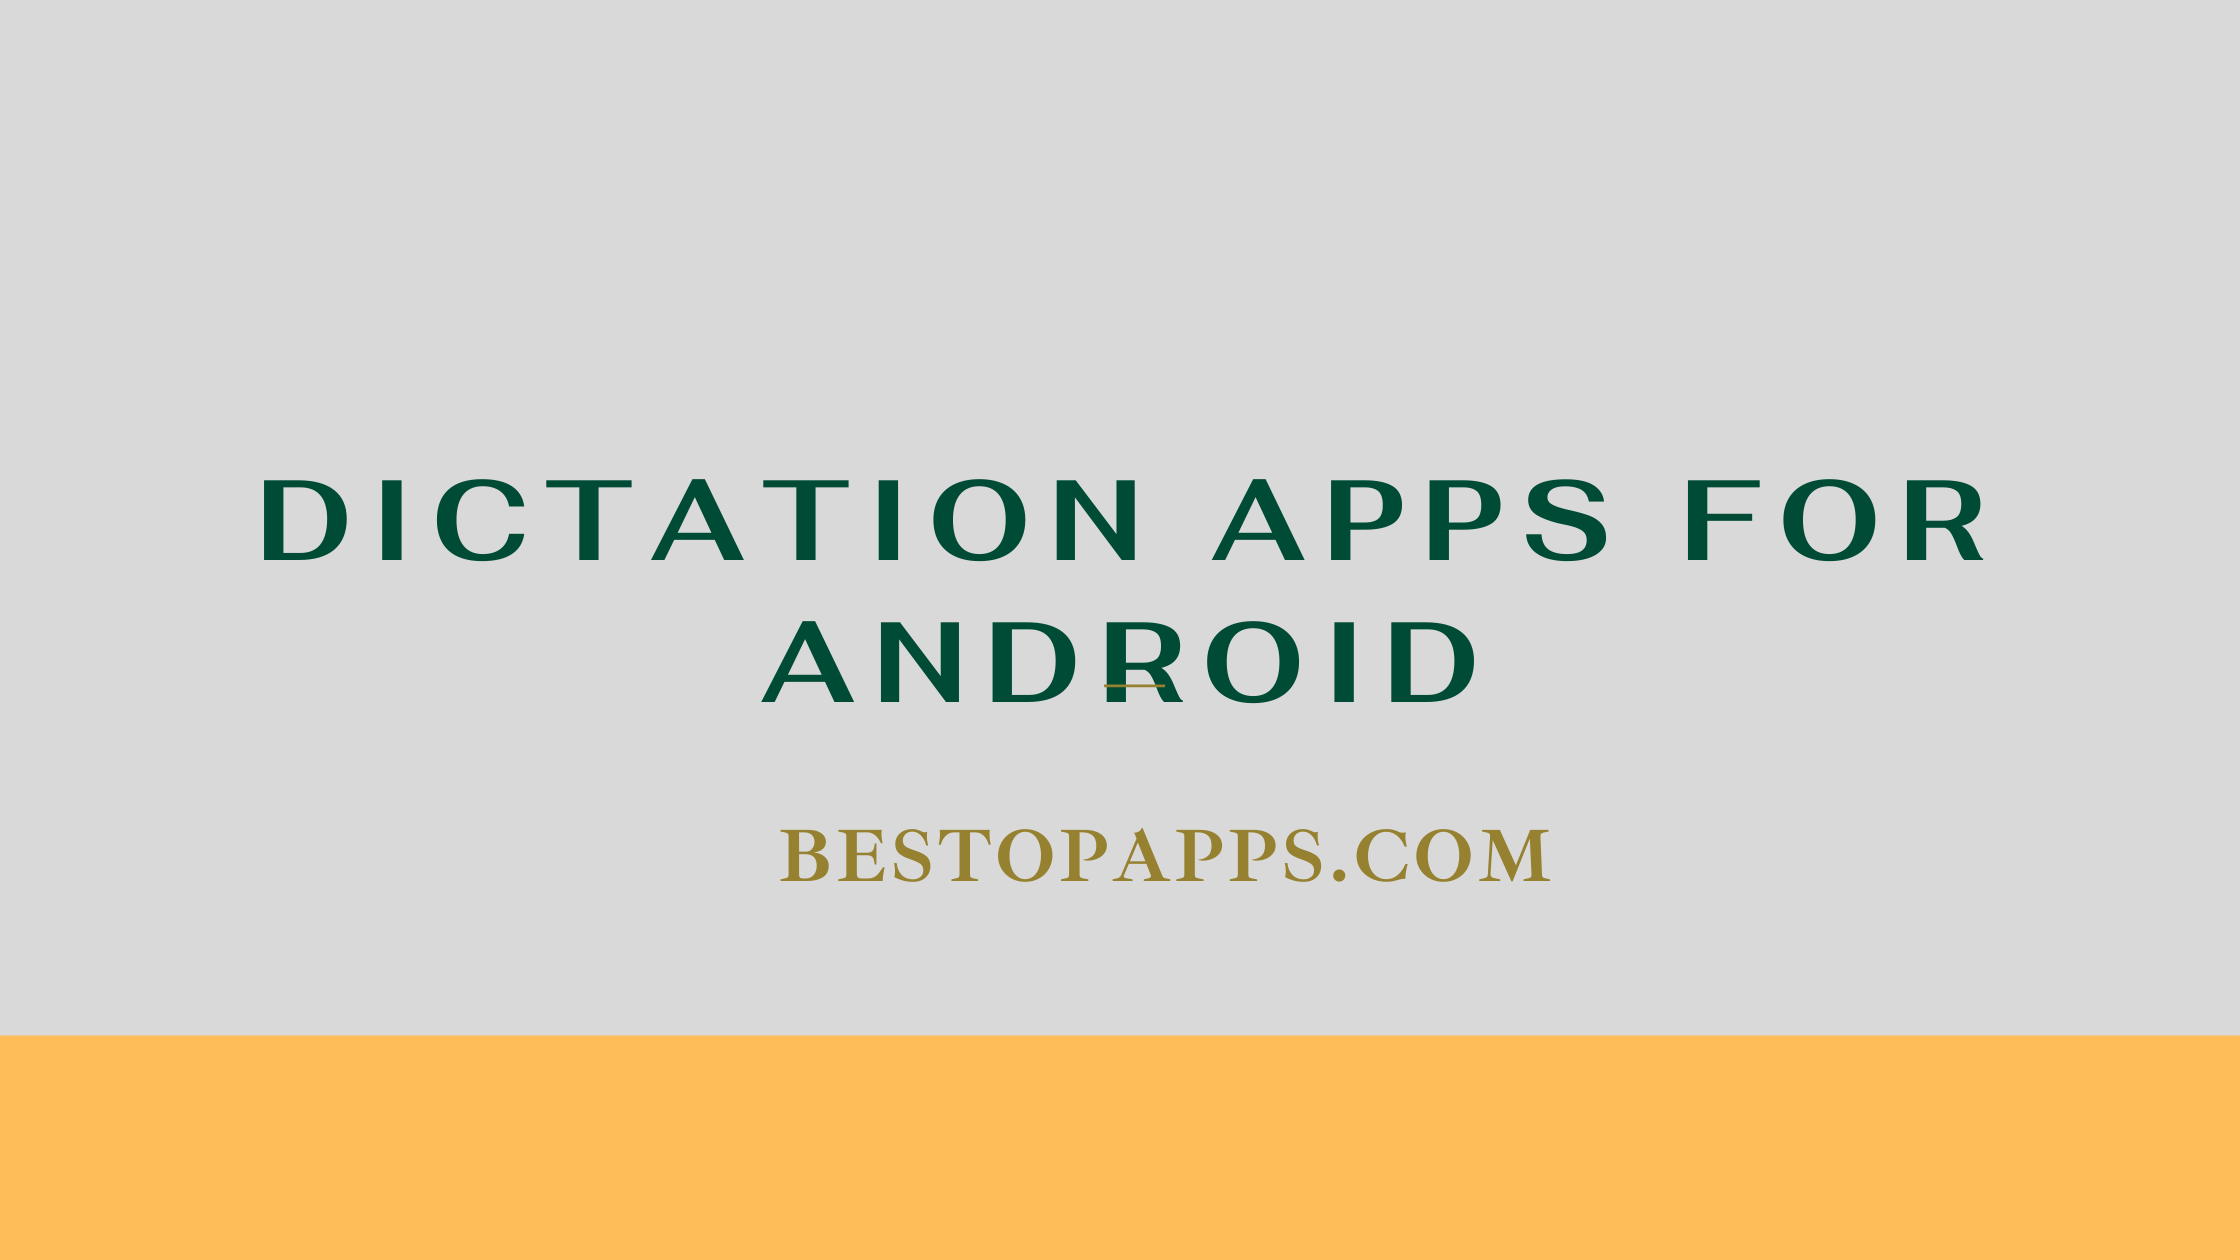 Dictation Apps for Android